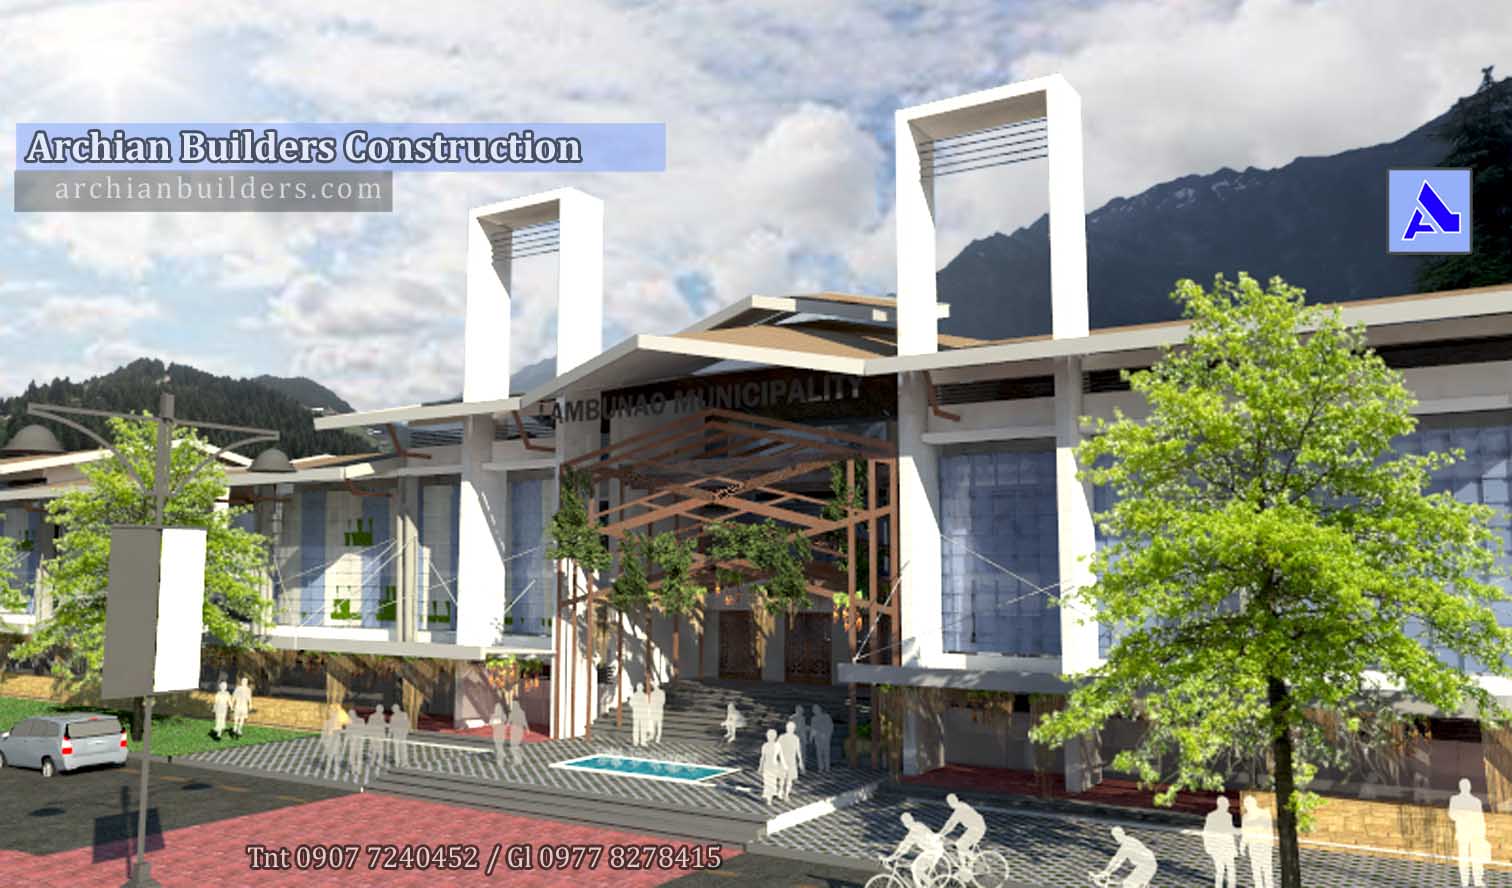 Town Hall - City Hall - Municipal Hall Front Elevation 3rd-District Western-Visayas-Modern Philippines